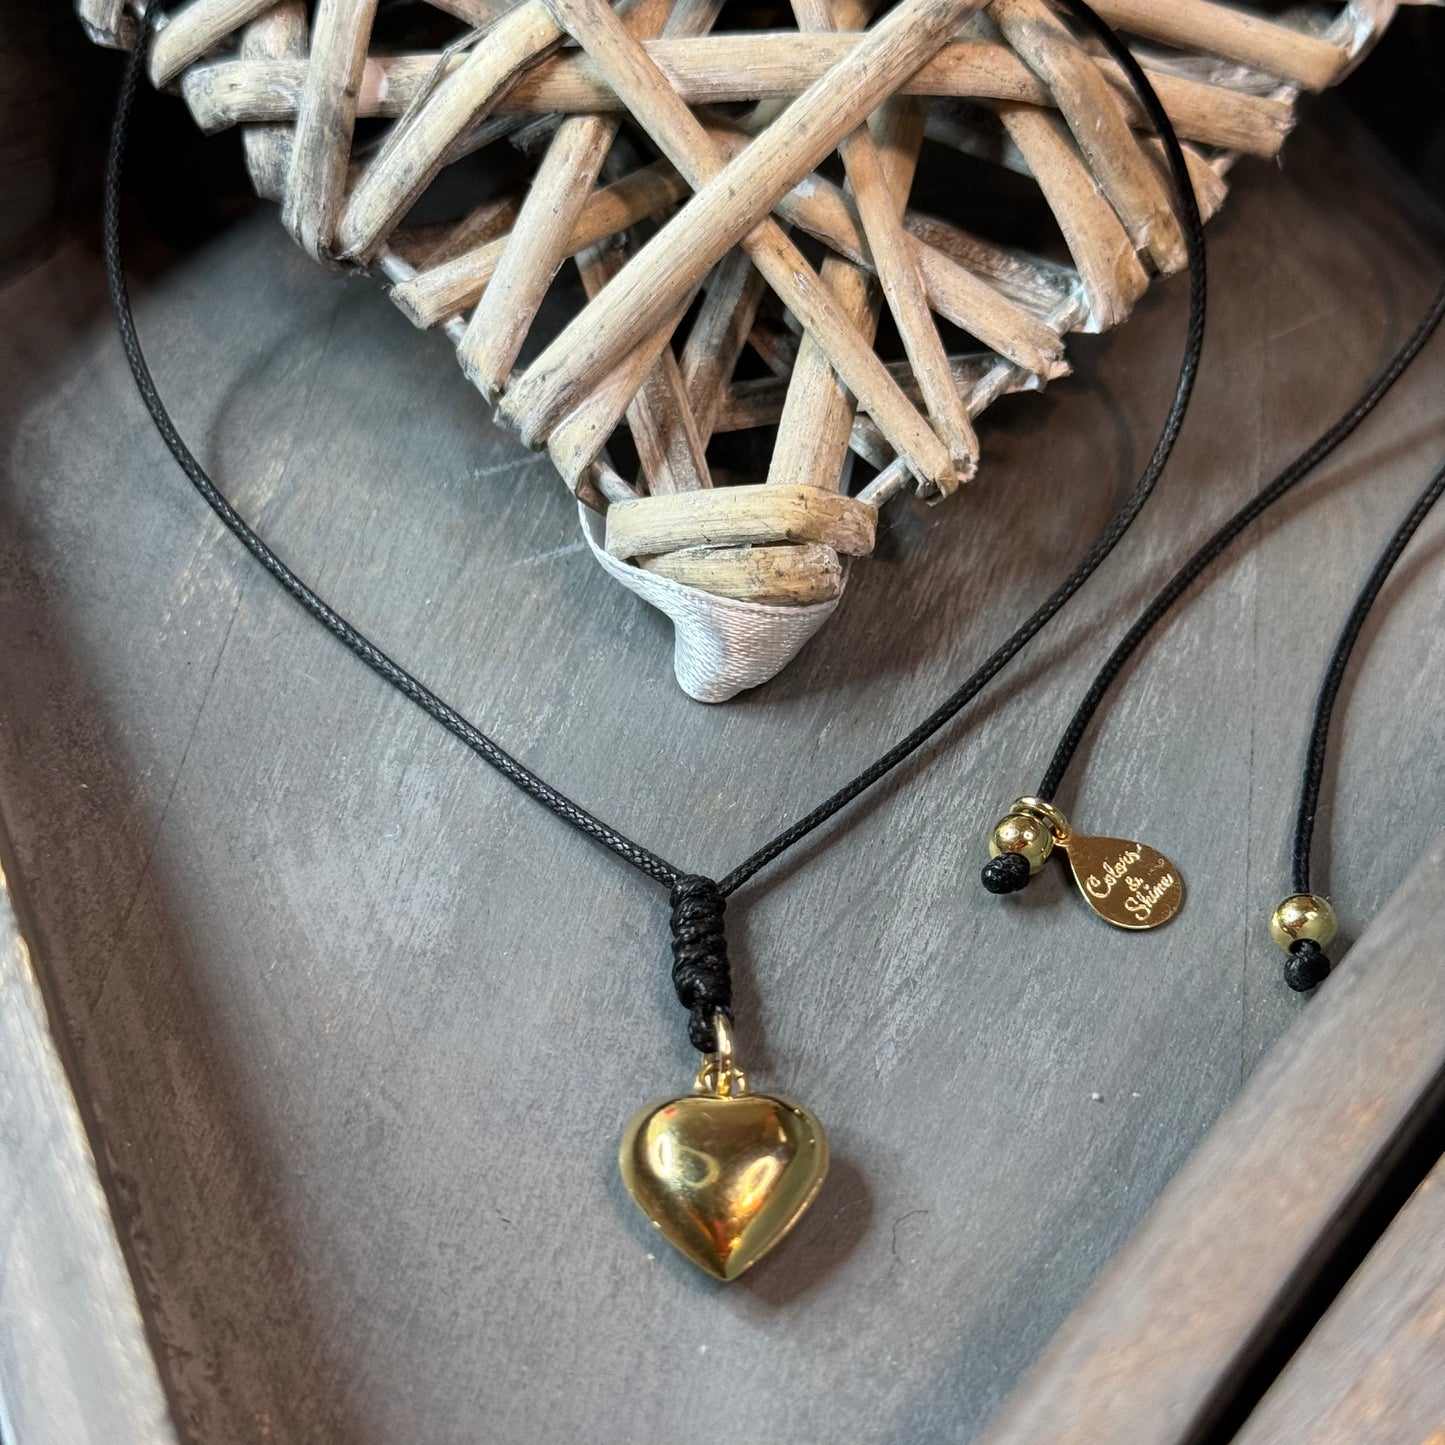 Adjustable Cord Necklace with 18k Gold-Filled Heart Charm